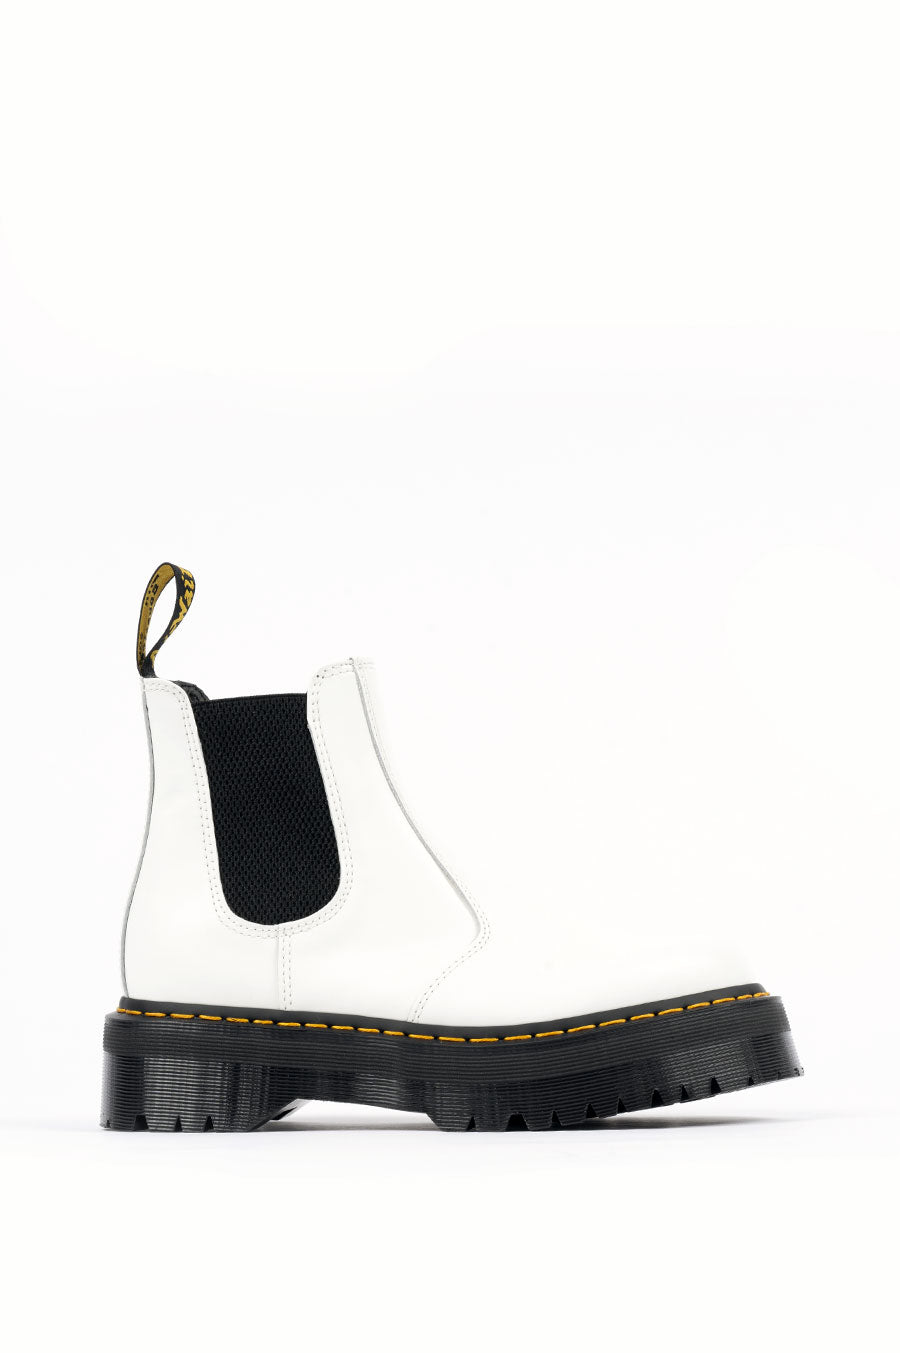 DR MARTENS 2976 QUAD CHELSEA BOOT WHITE SMOOTH